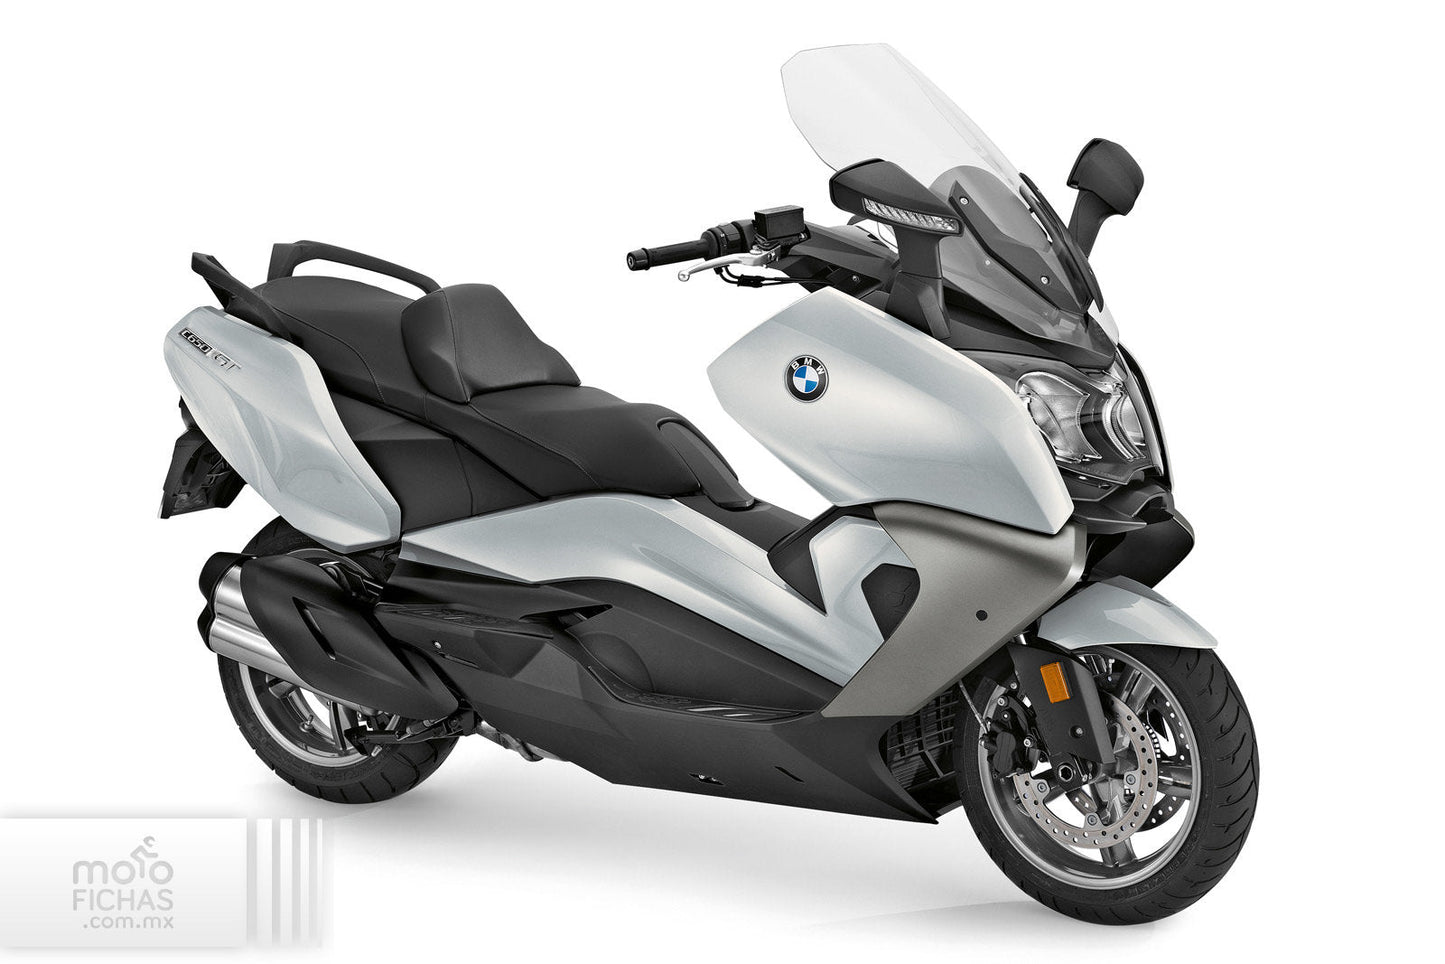 BMW C650 GT 2015-2021 Maxi Scooter Graphics Template Vector